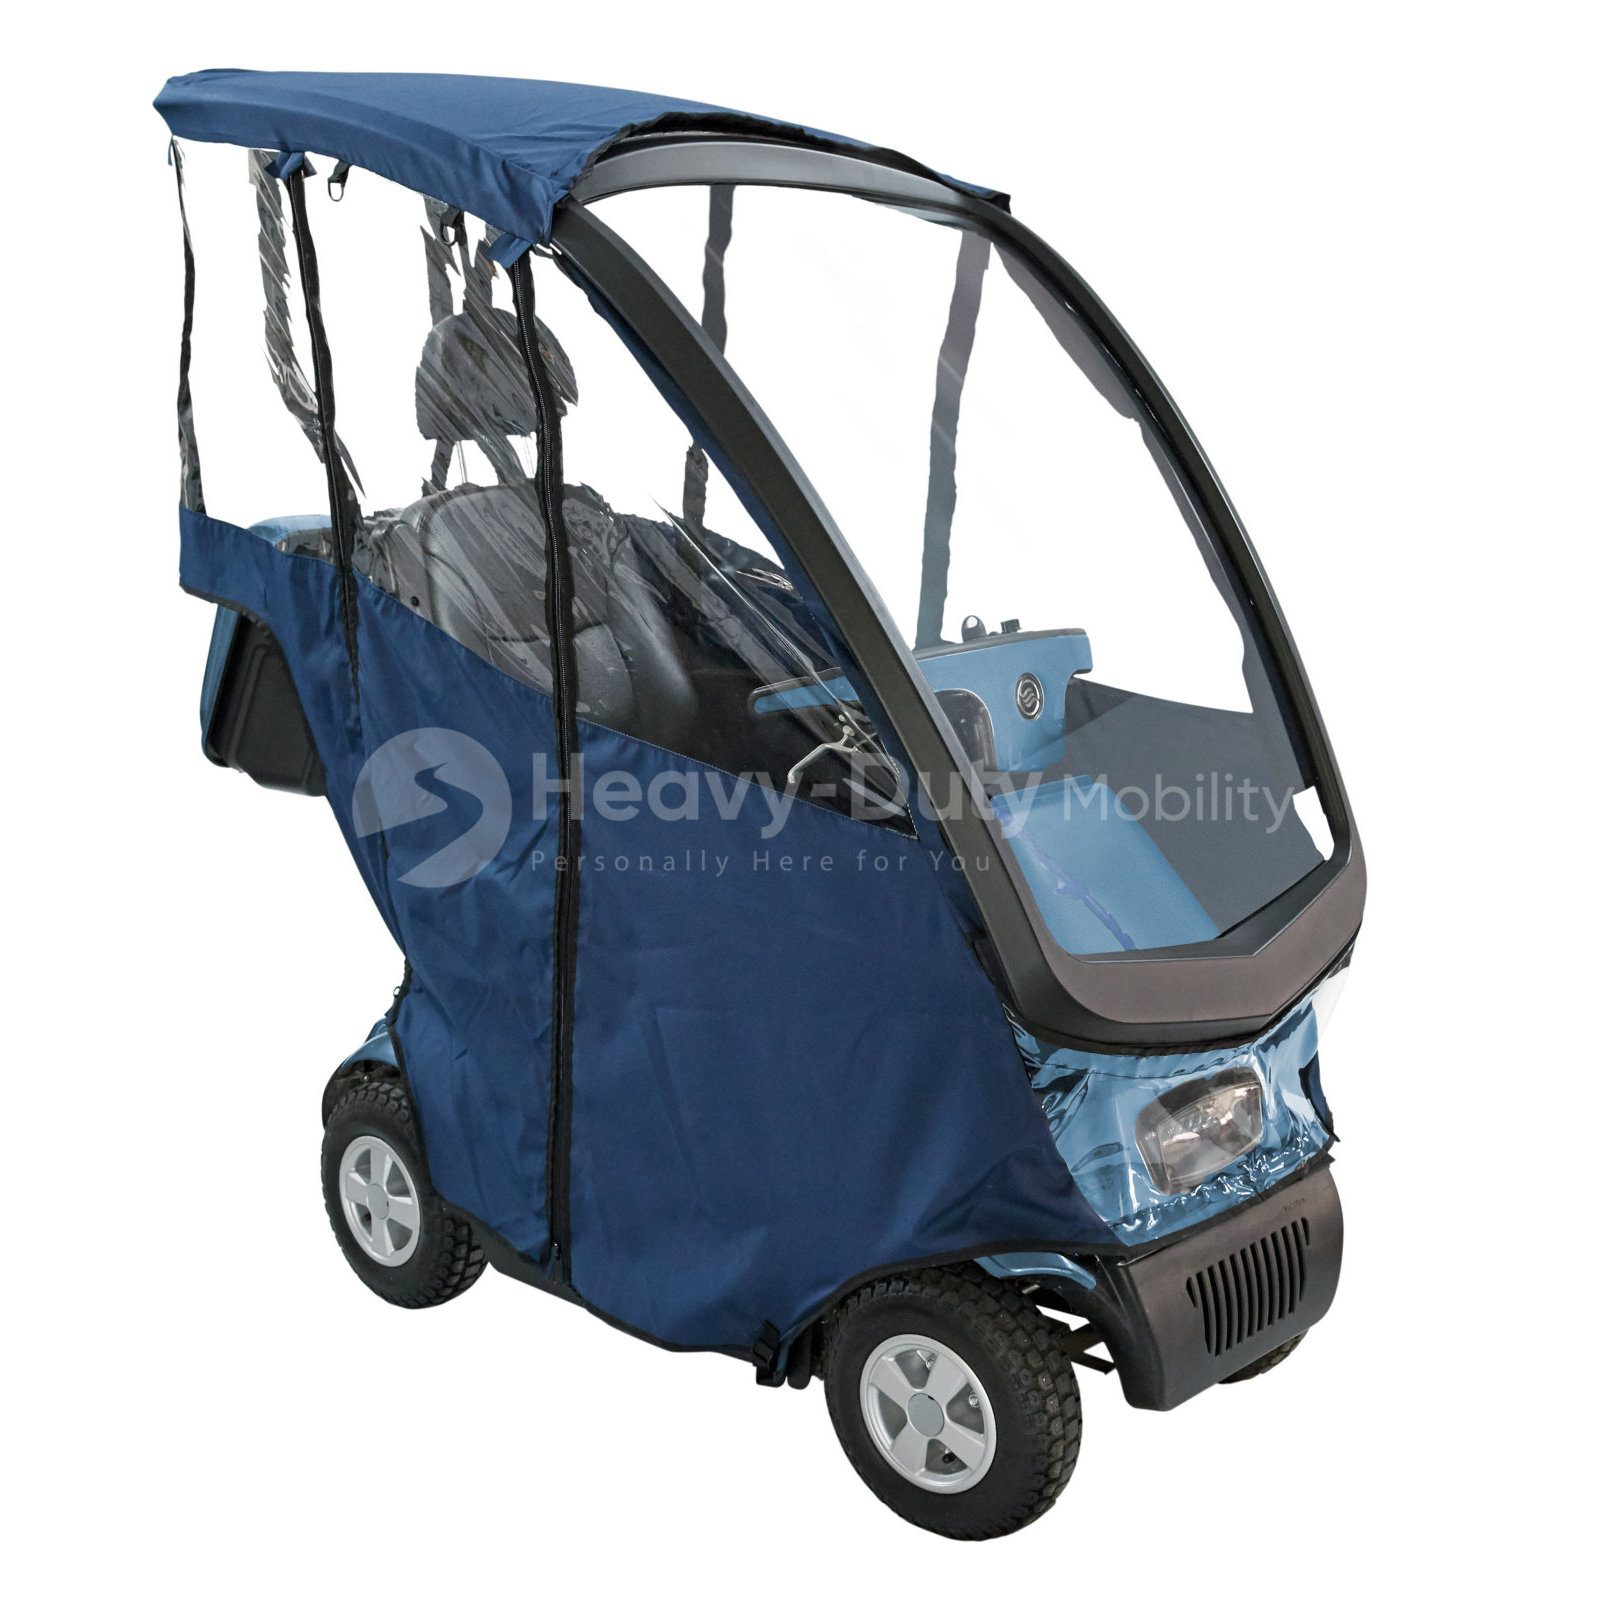 Afiscooter C4 Canopy Enclosed Heavy Duty 4-Wheel